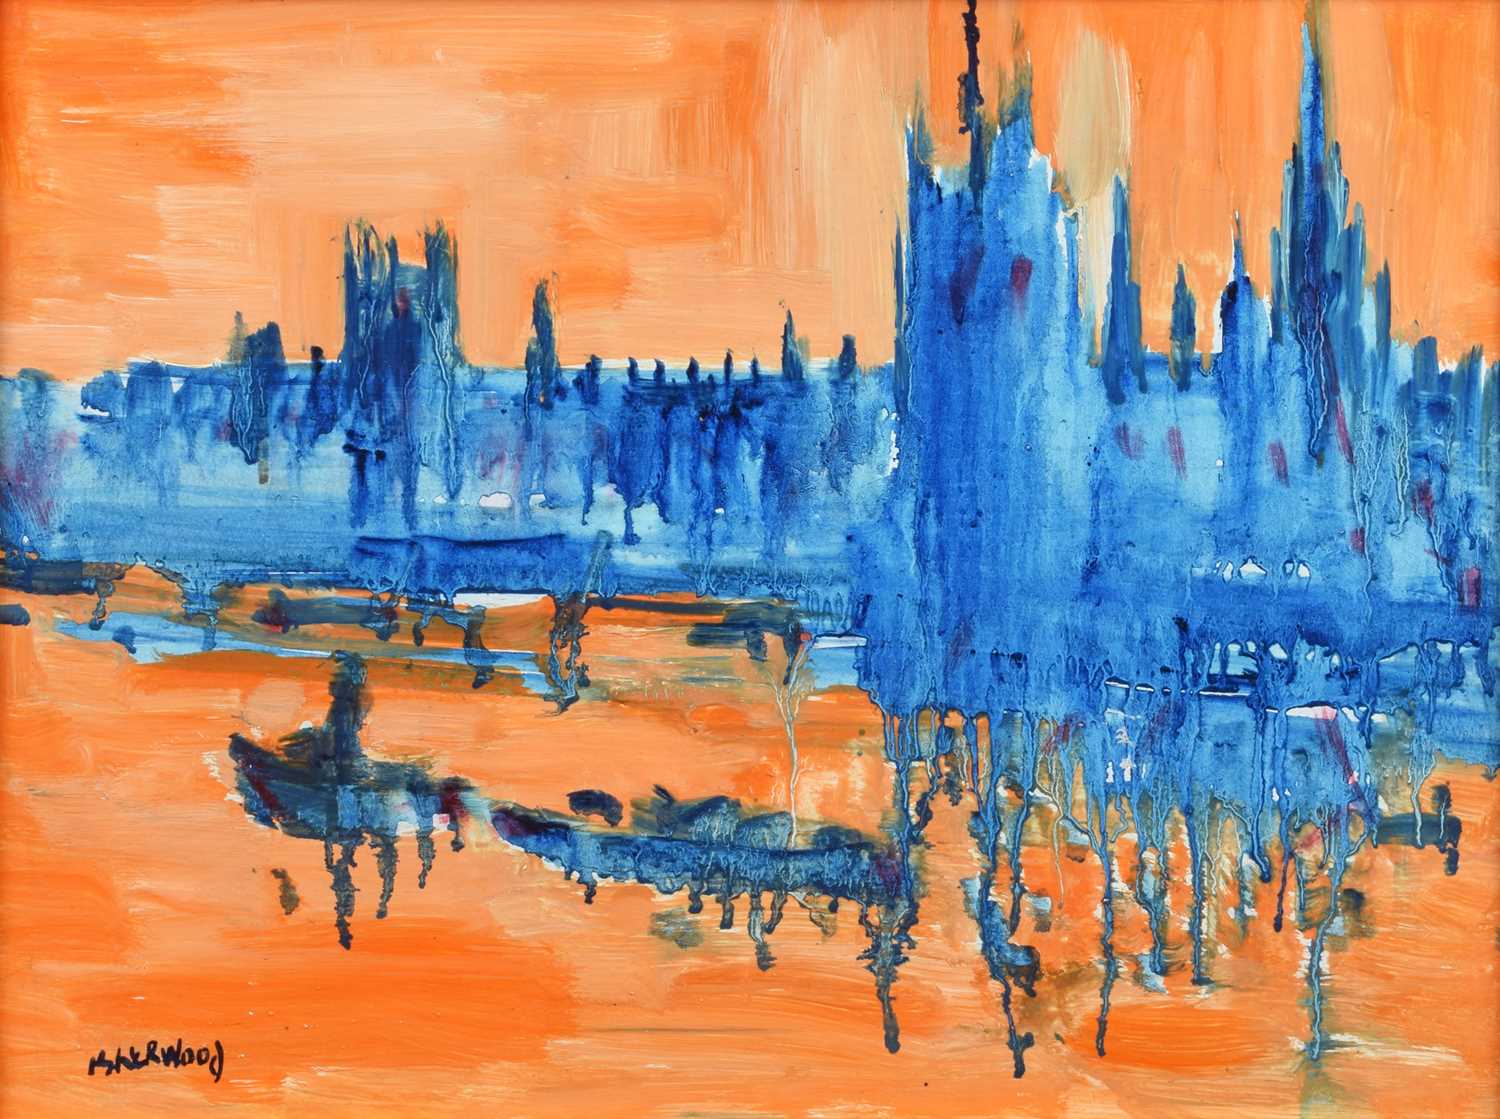 James Lawrence Isherwood F.R.S.A., F.I.A.L. (British 1917-1989) "Sun, Houses of Parliament"